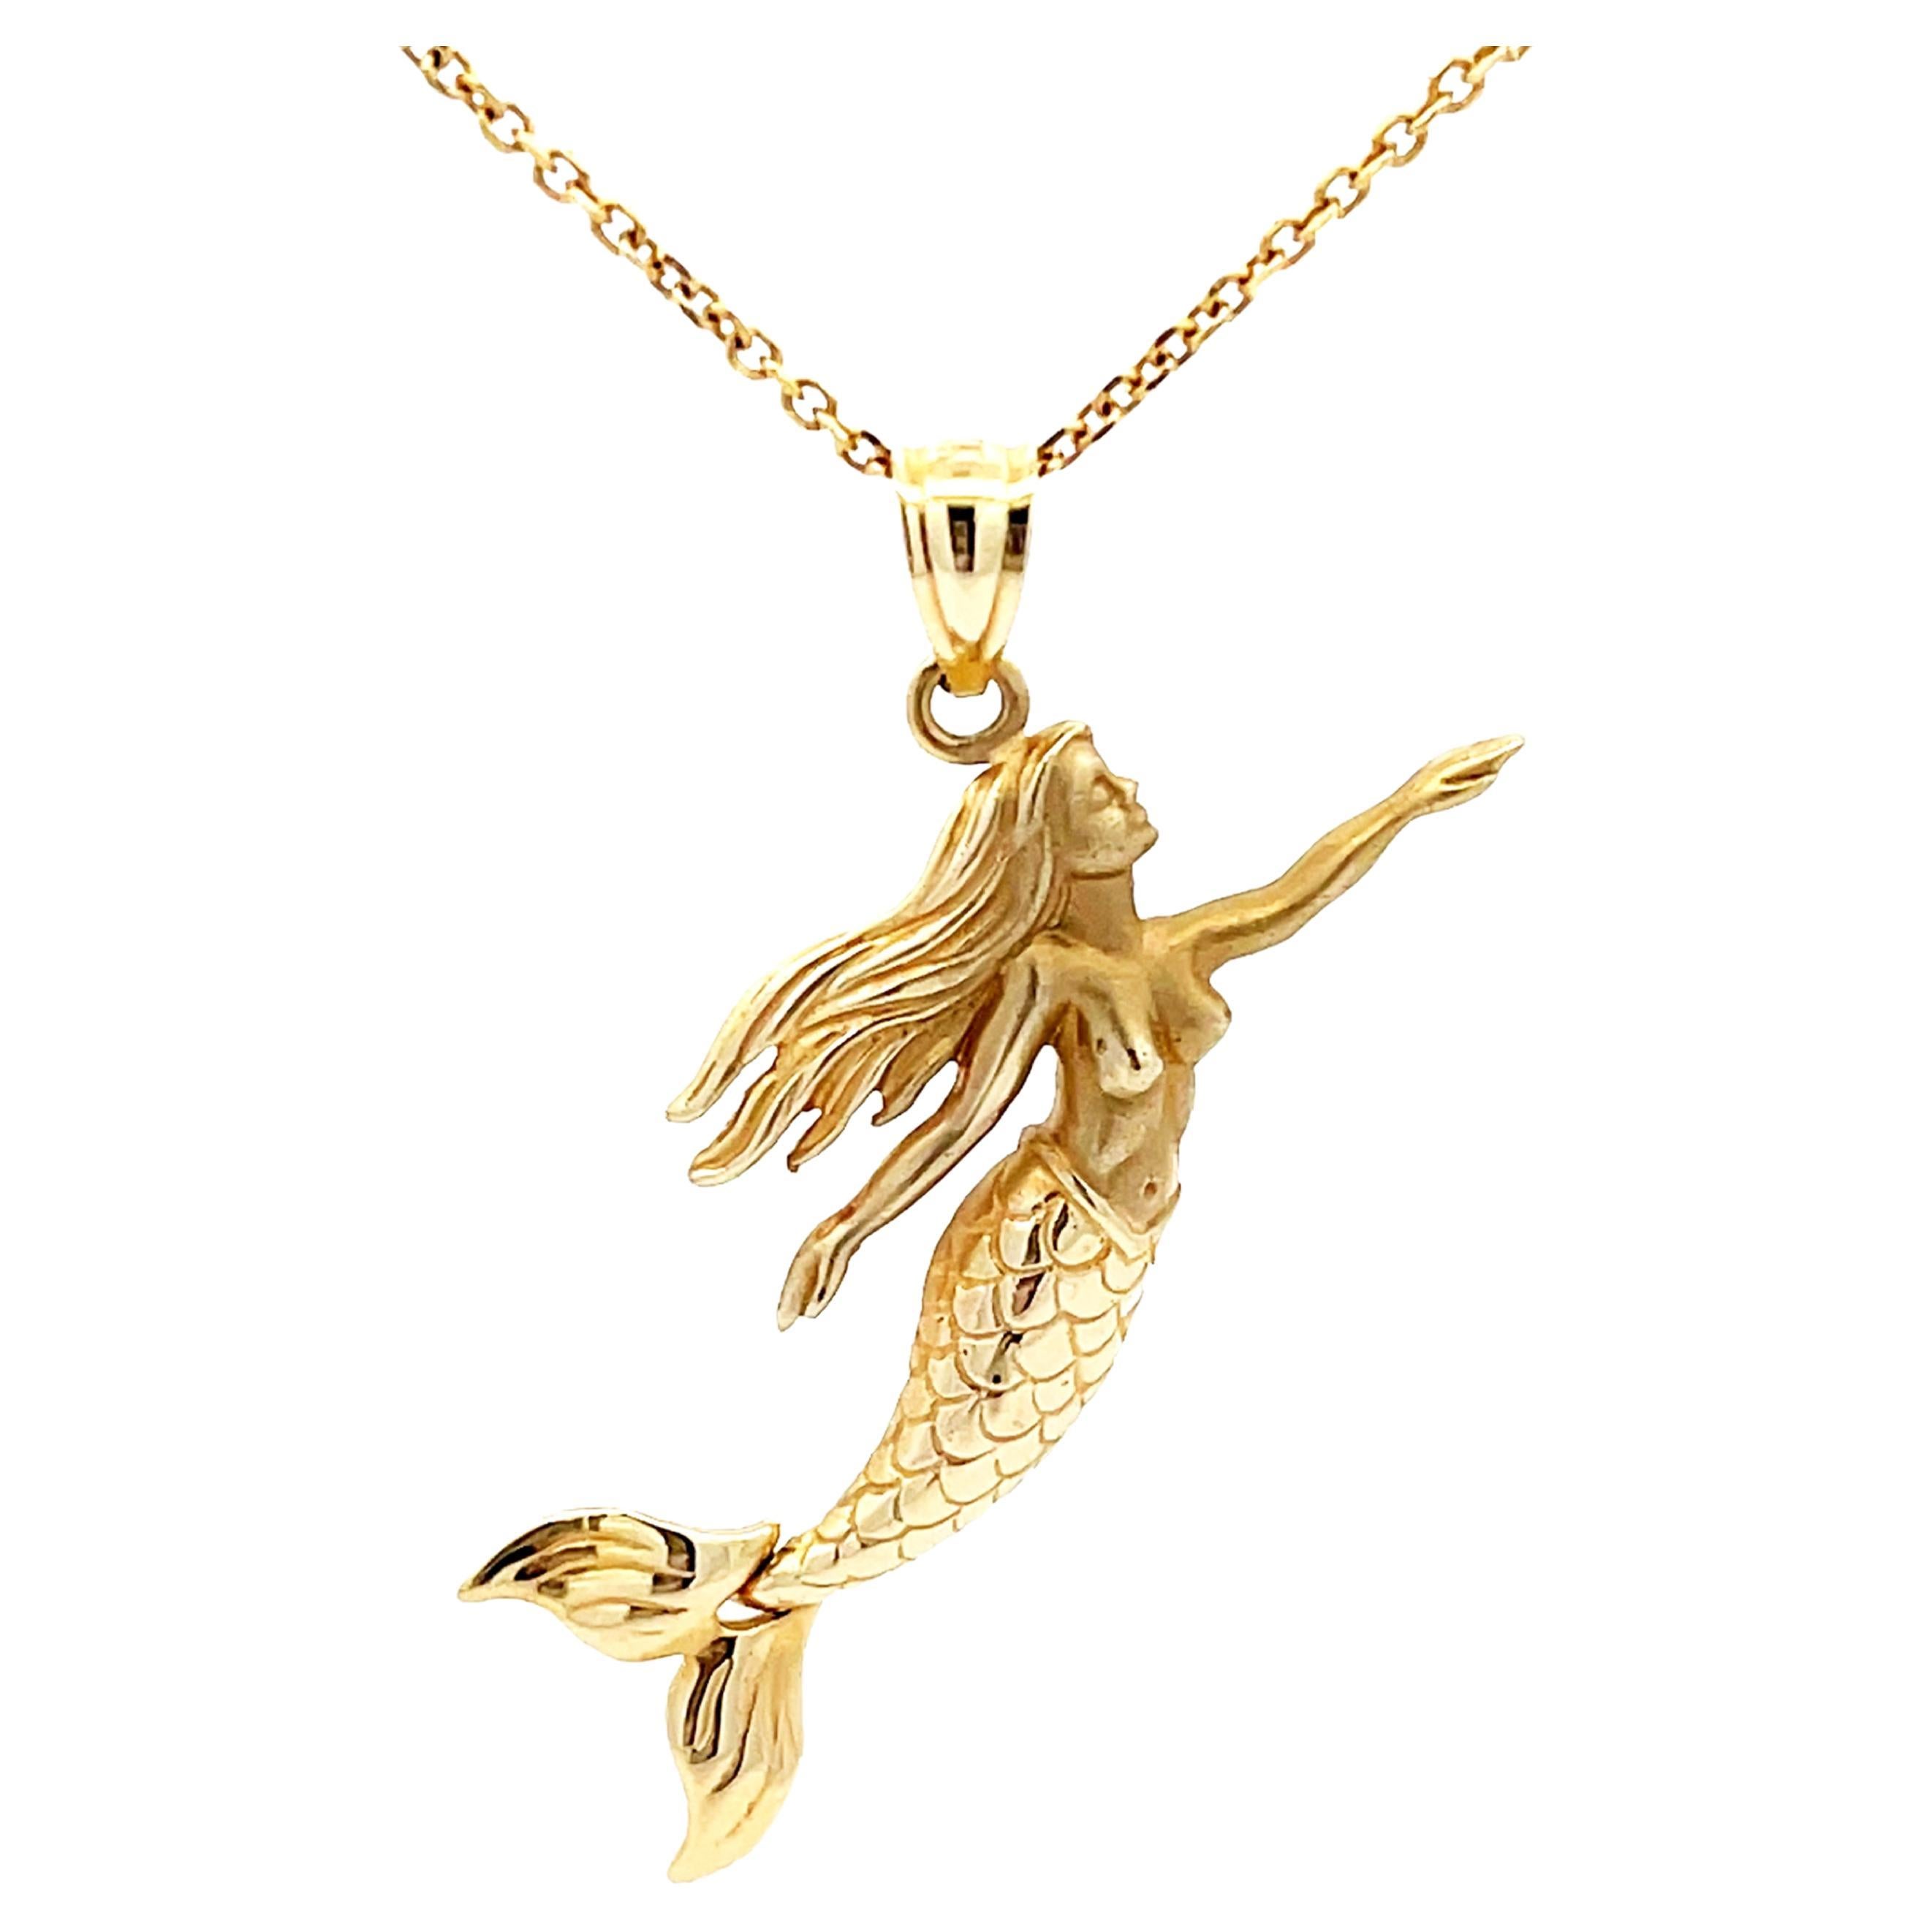 Mermaid Necklace in 14k Yellow Gold